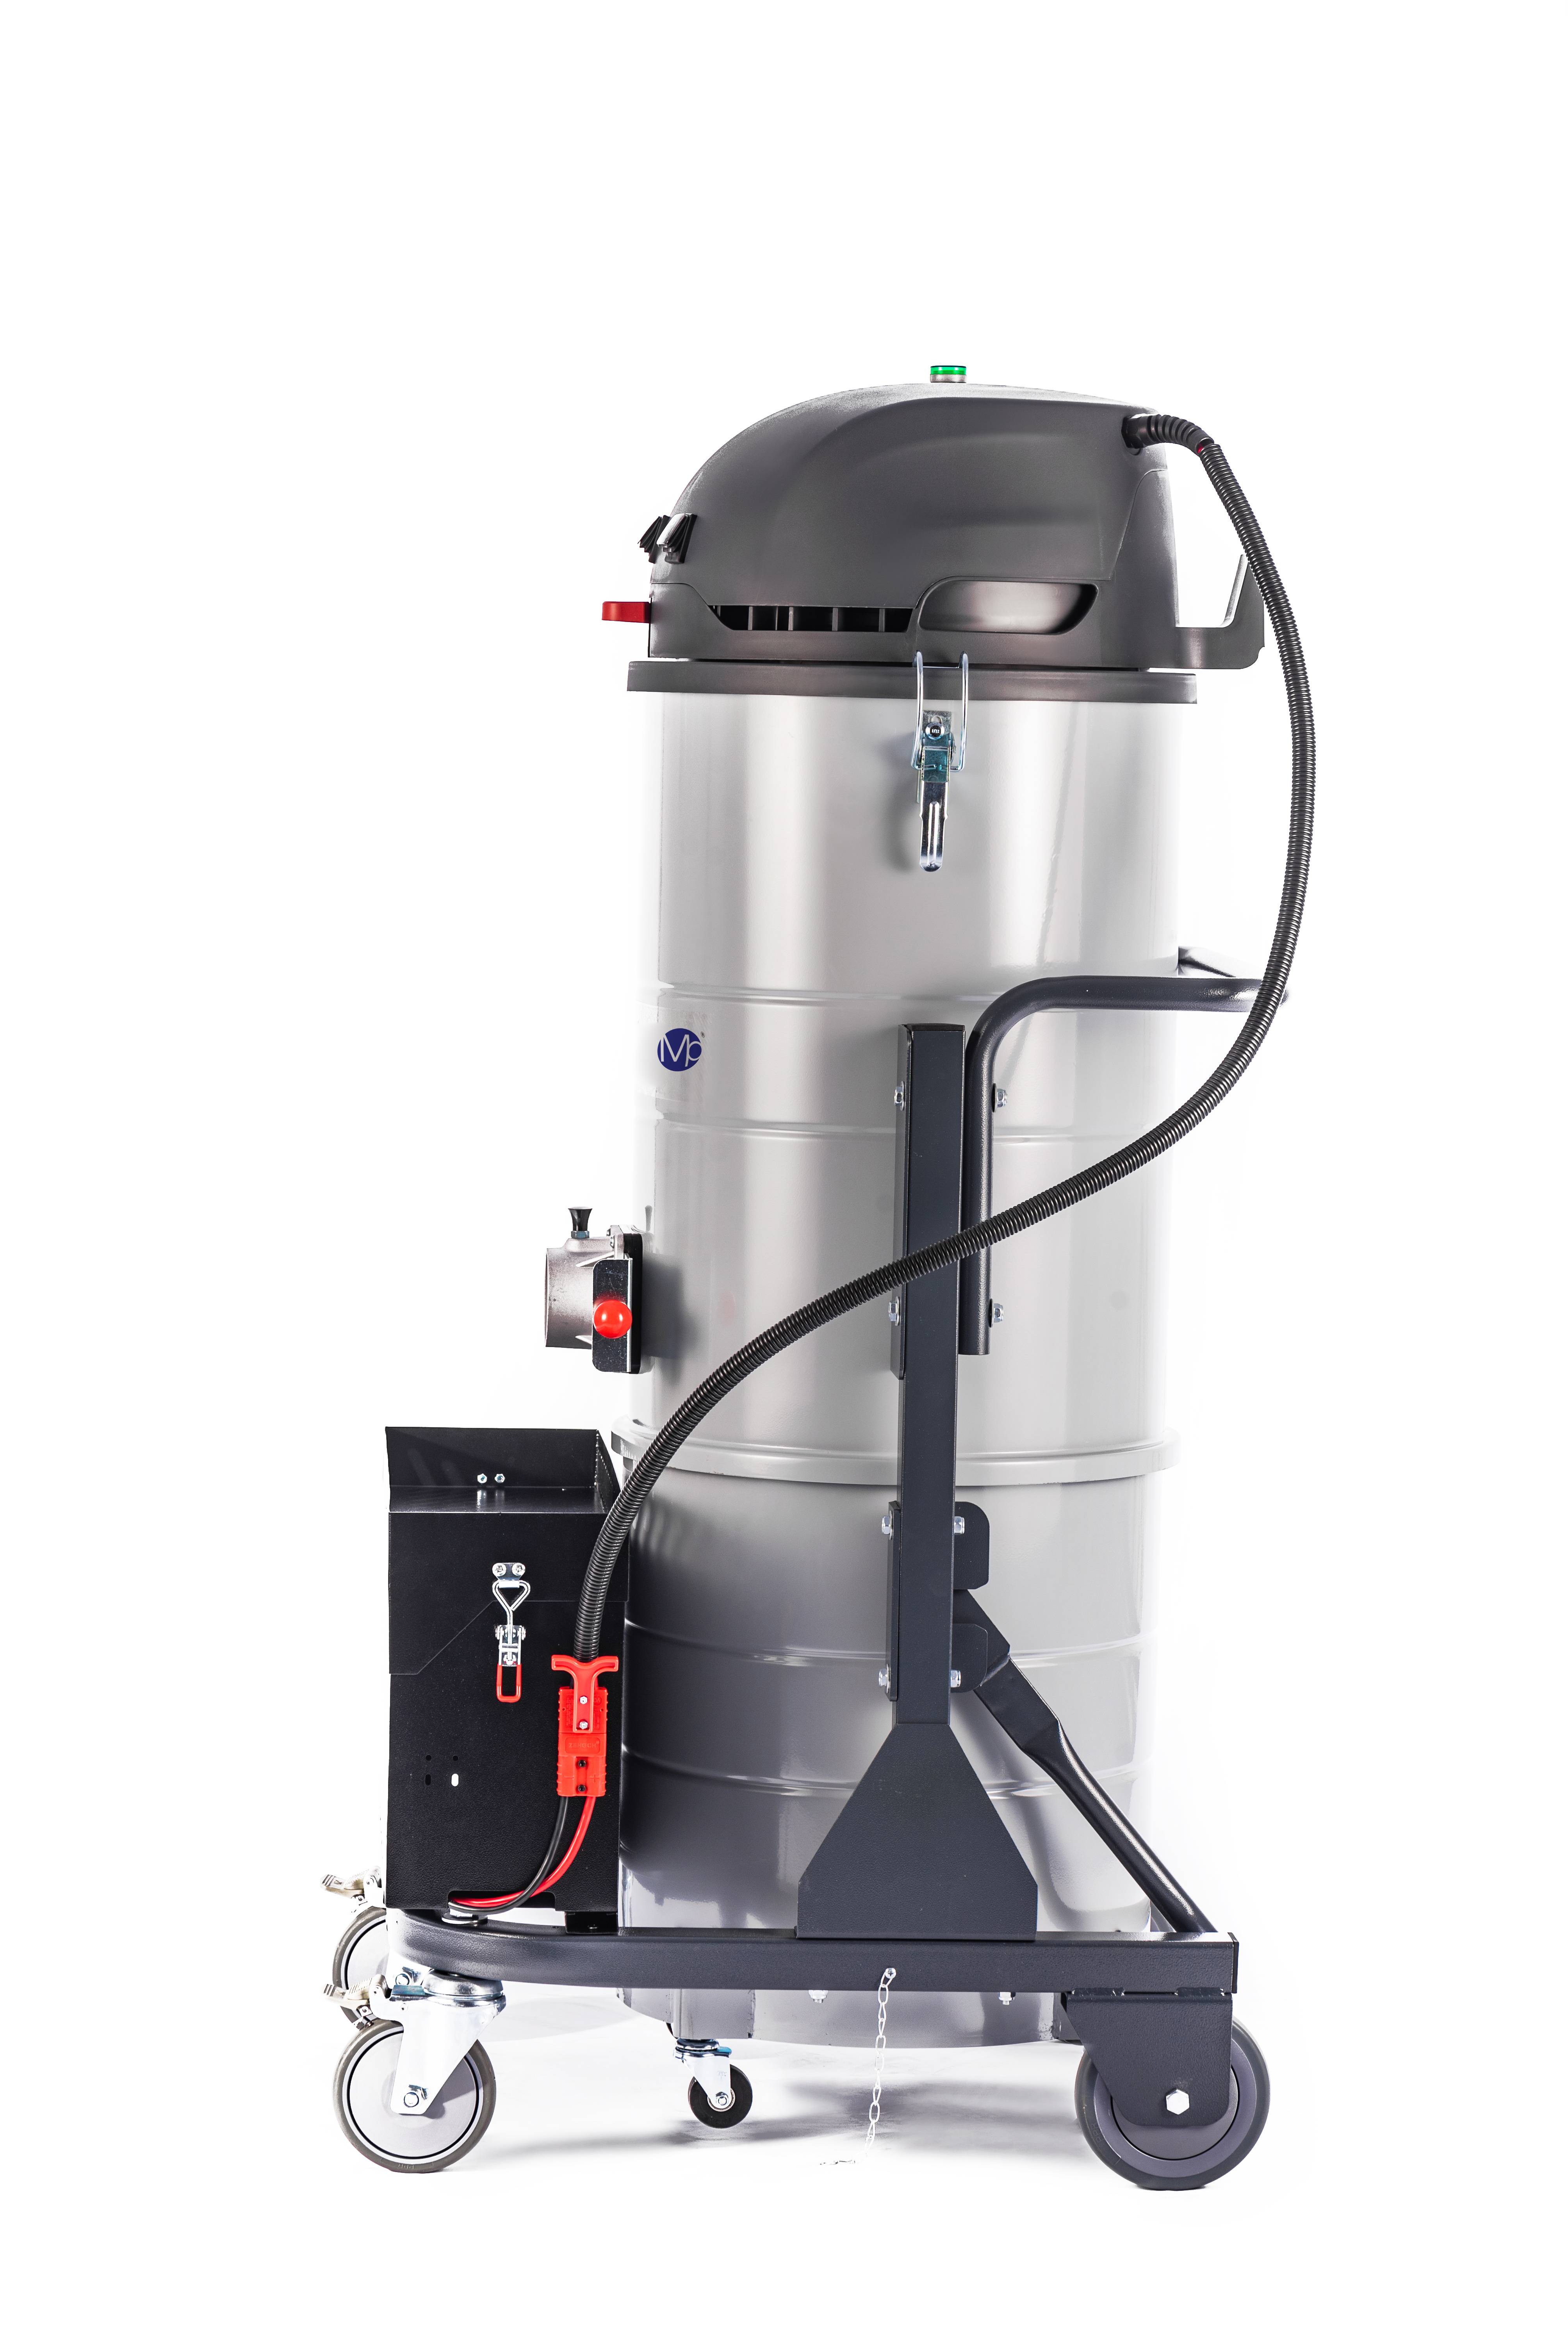 The Importance of Industrial Vacuum Cleaners in the Workplace